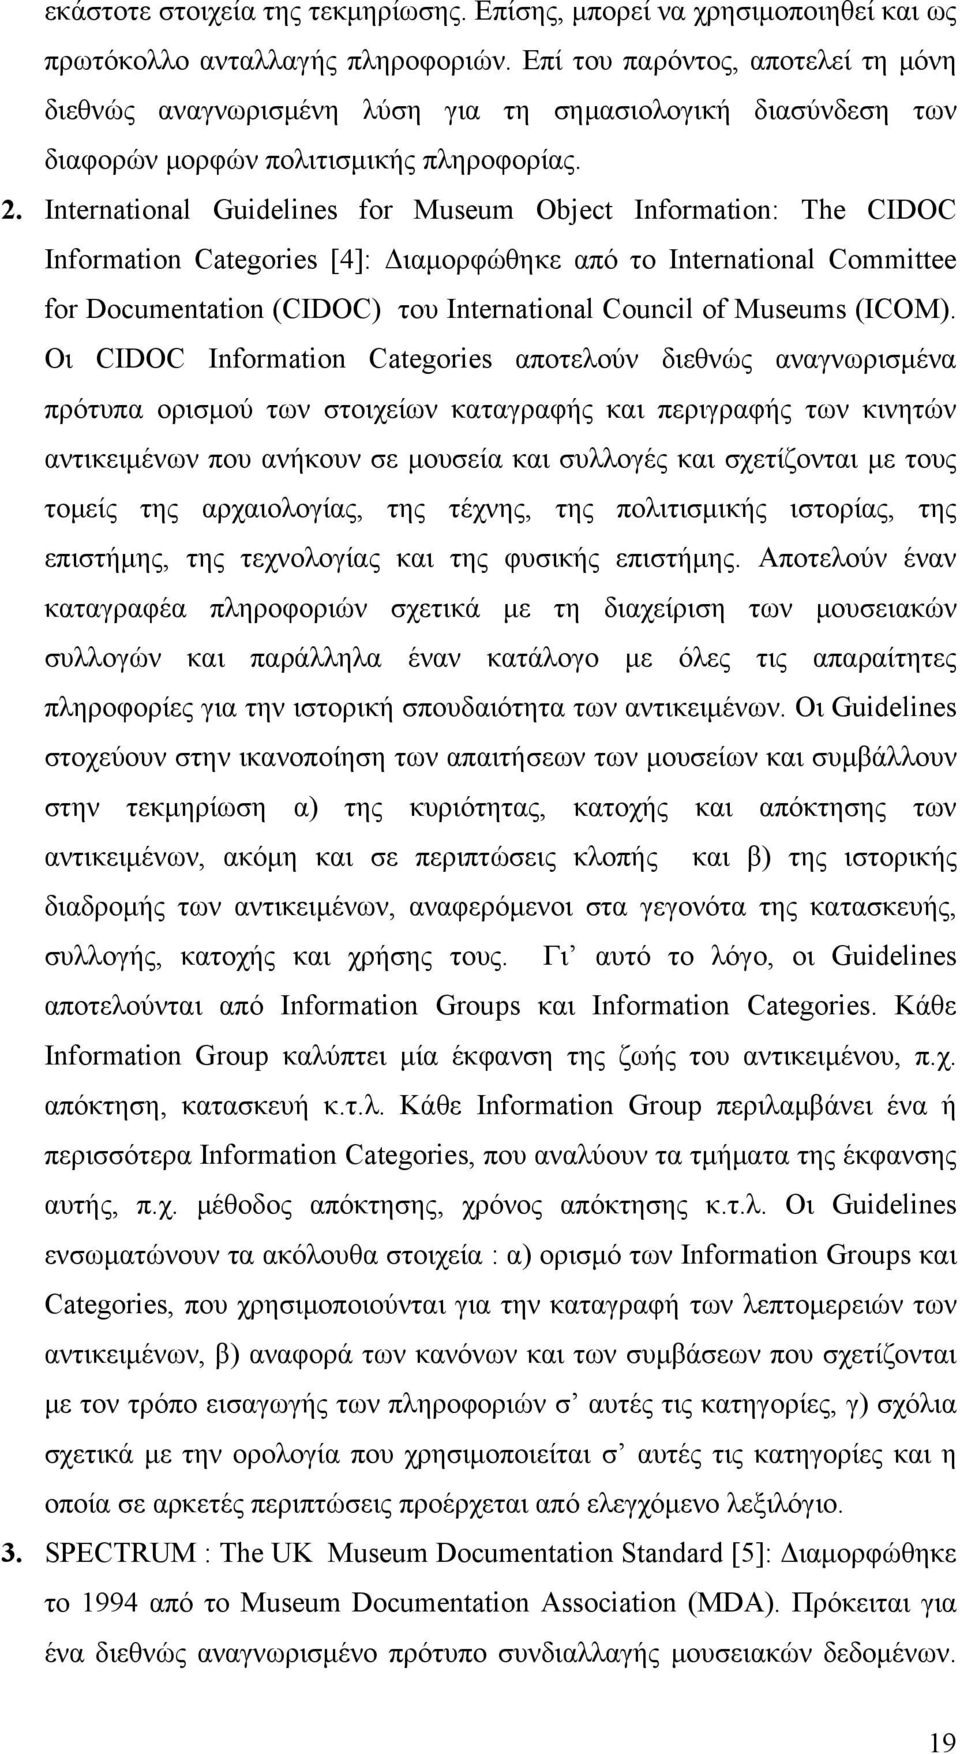 International Guidelines for Museum Object Information: The CIDOC Information Categories [4]: Διαμορφώθηκε από το International Committee for Documentation (CIDOC) του International Council of